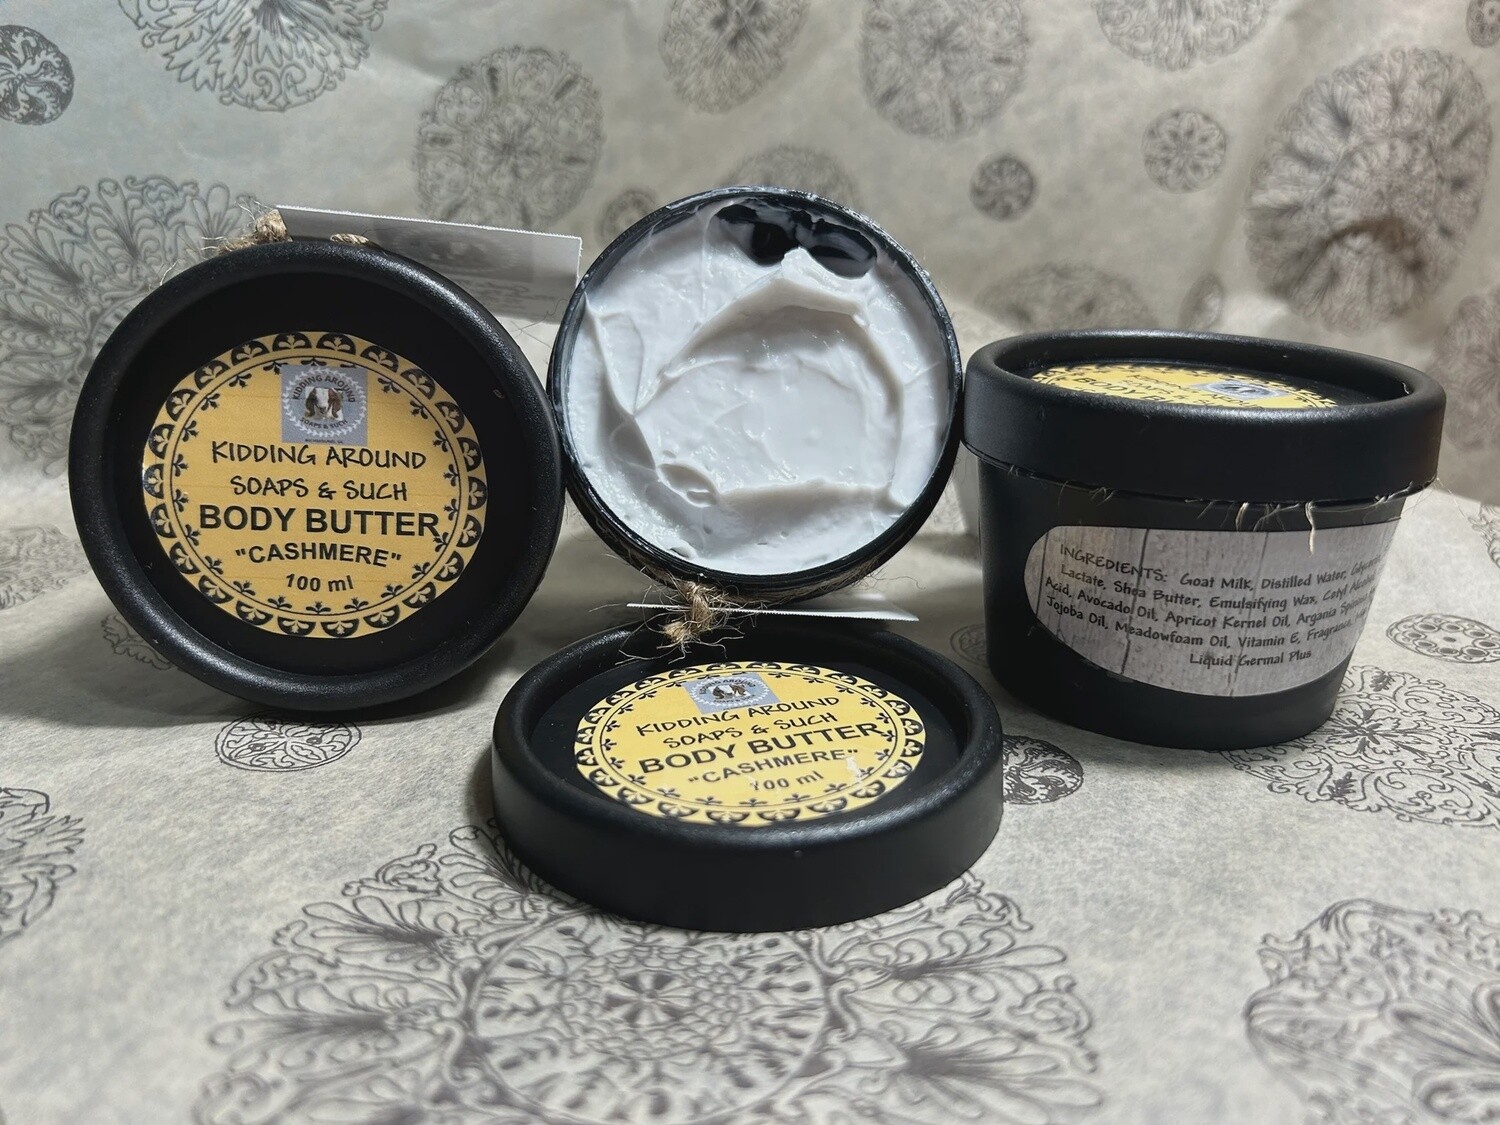 “Cashmere” Body Butter with Goats Milk